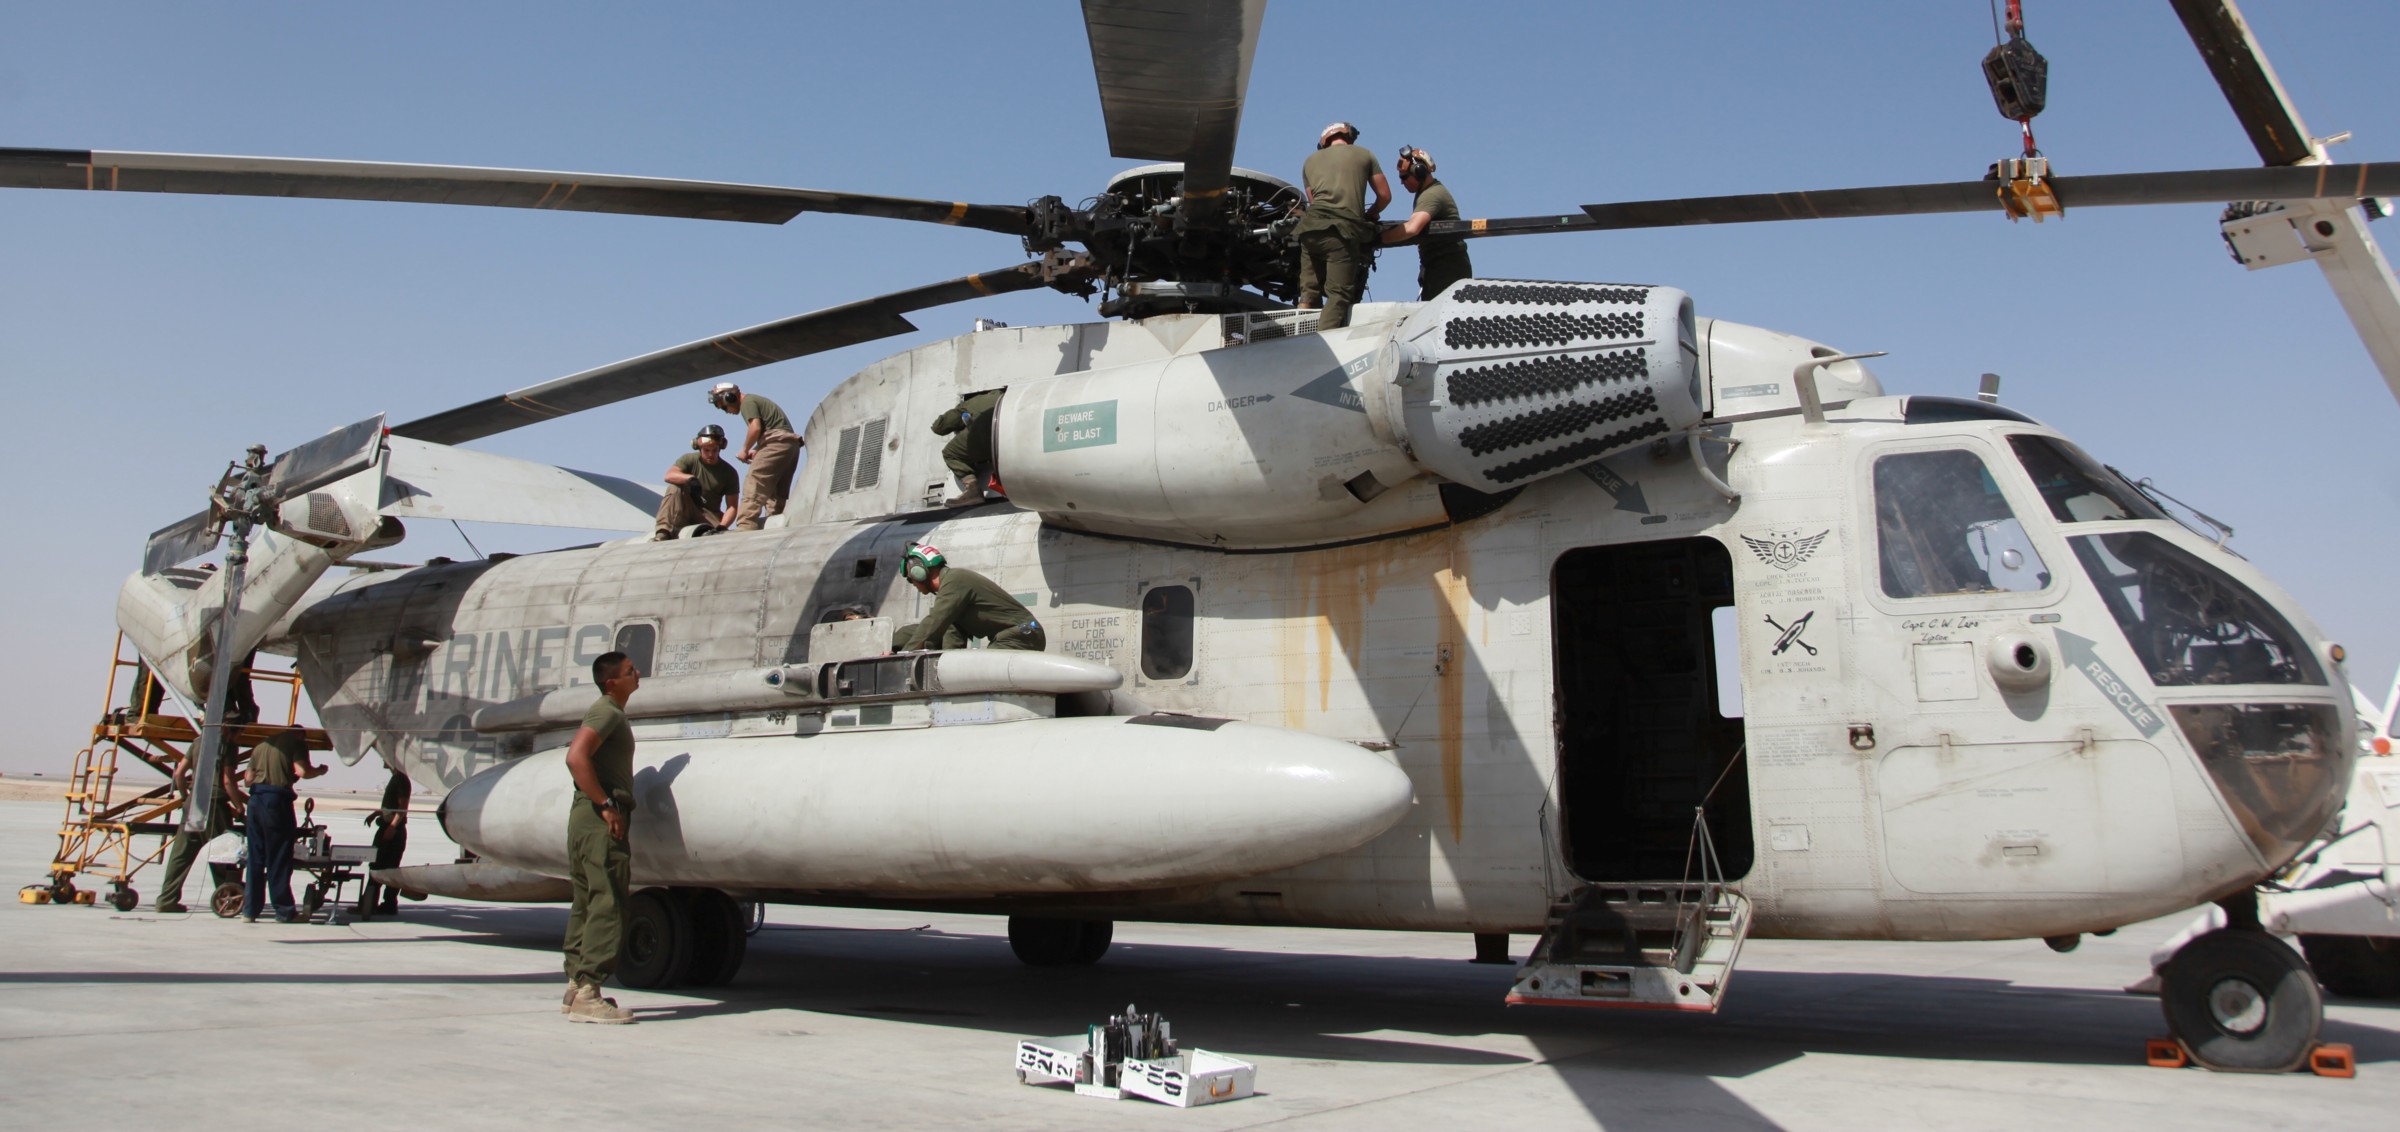 hmh-362 ugly angels marine heavy helicopter squadron usmc sikorsky ch-53d sea stallion afghanistan